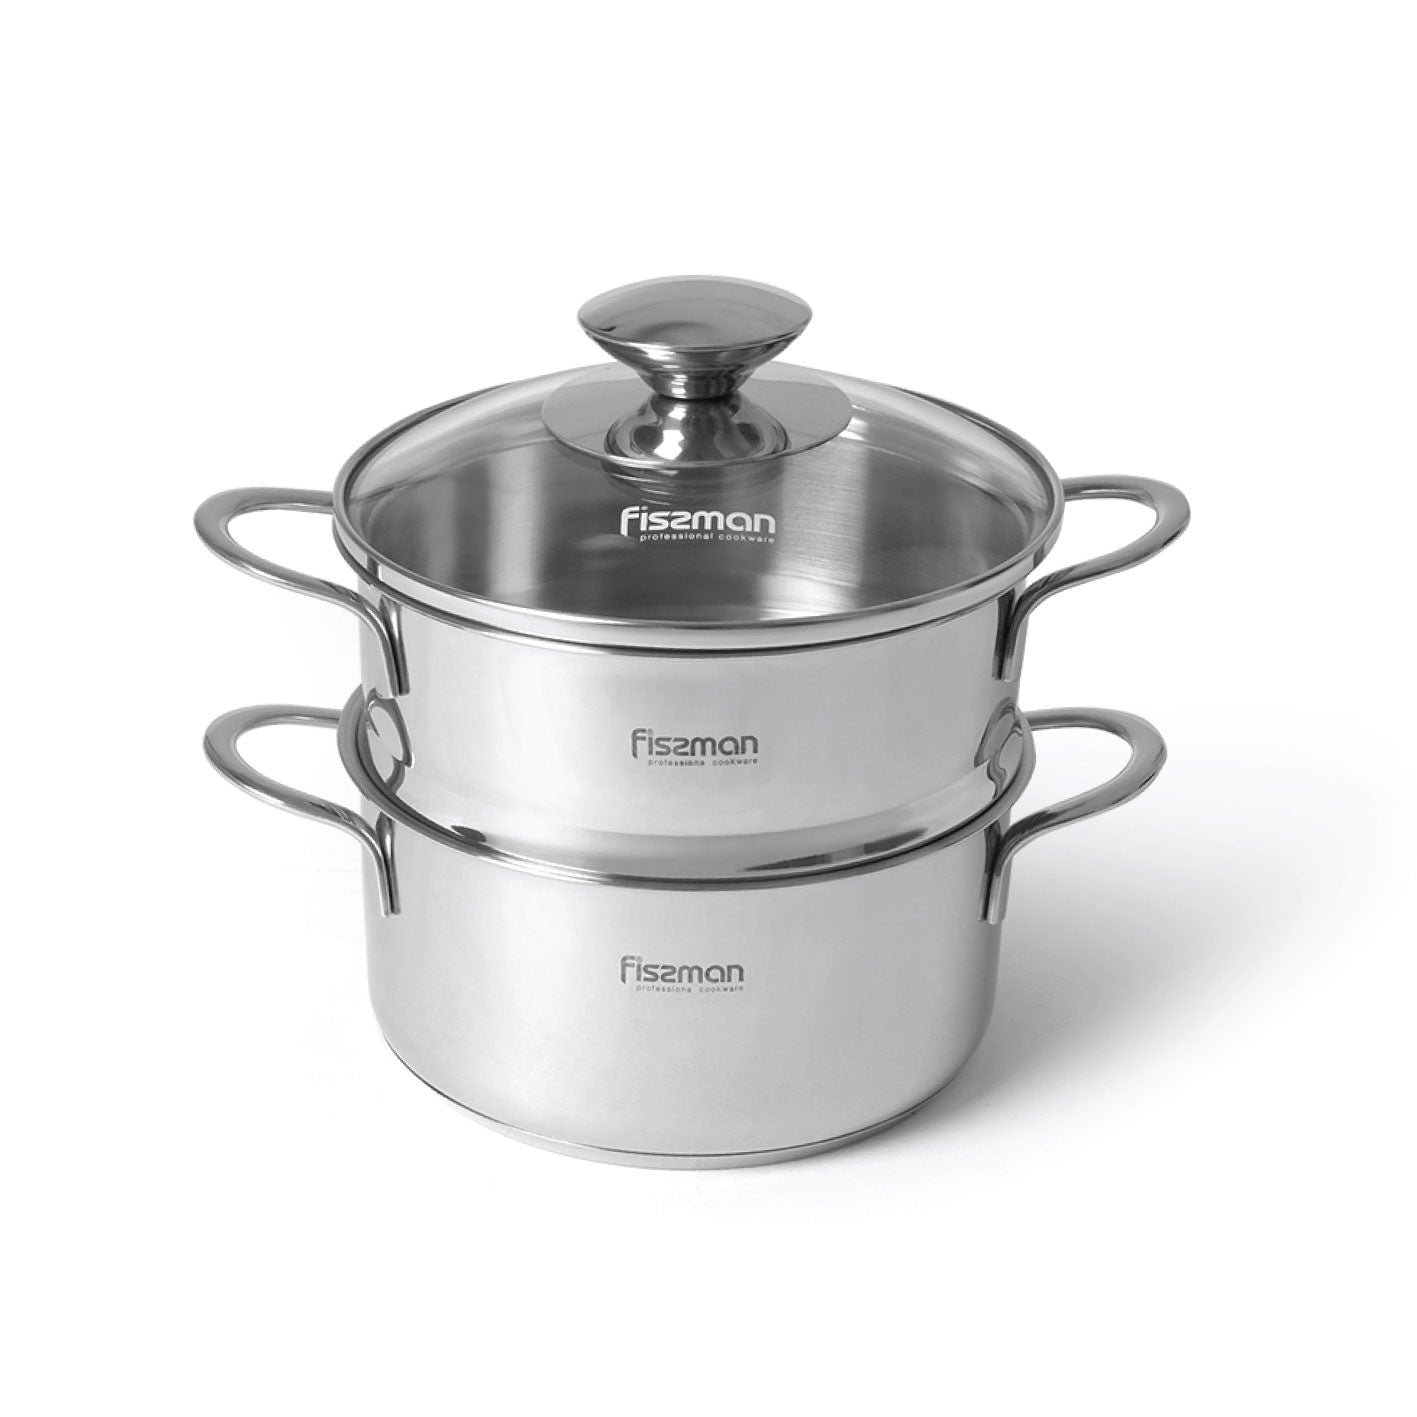 http://fissman.com.au/cdn/shop/products/5275-Mini-cooking-pot-BAMBINO-14x7.0-cm---1.1-LTR-with-steamer-insert-14x6.5-cm-with-glass-lid-_stainless-steel.jpg?v=1653979281